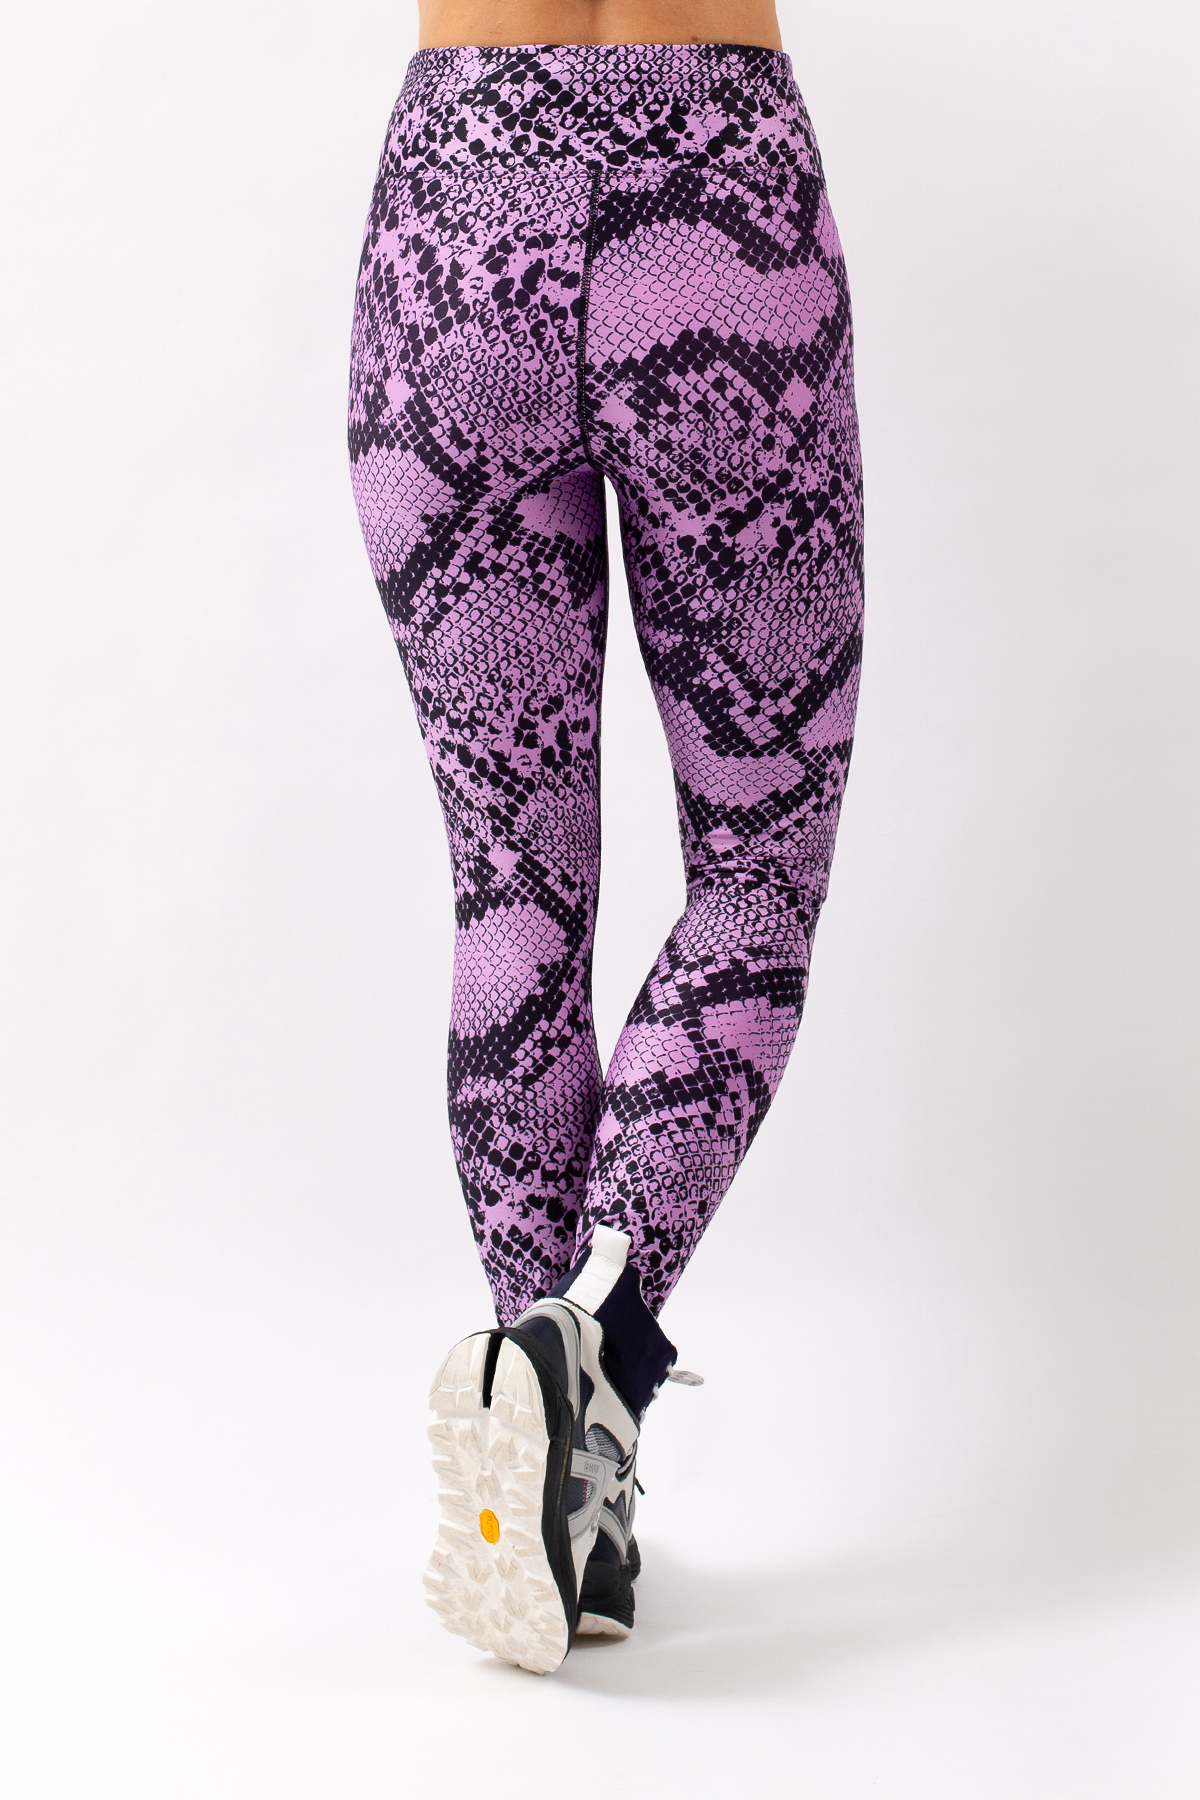 Icecold Tights - Pink Python | XL